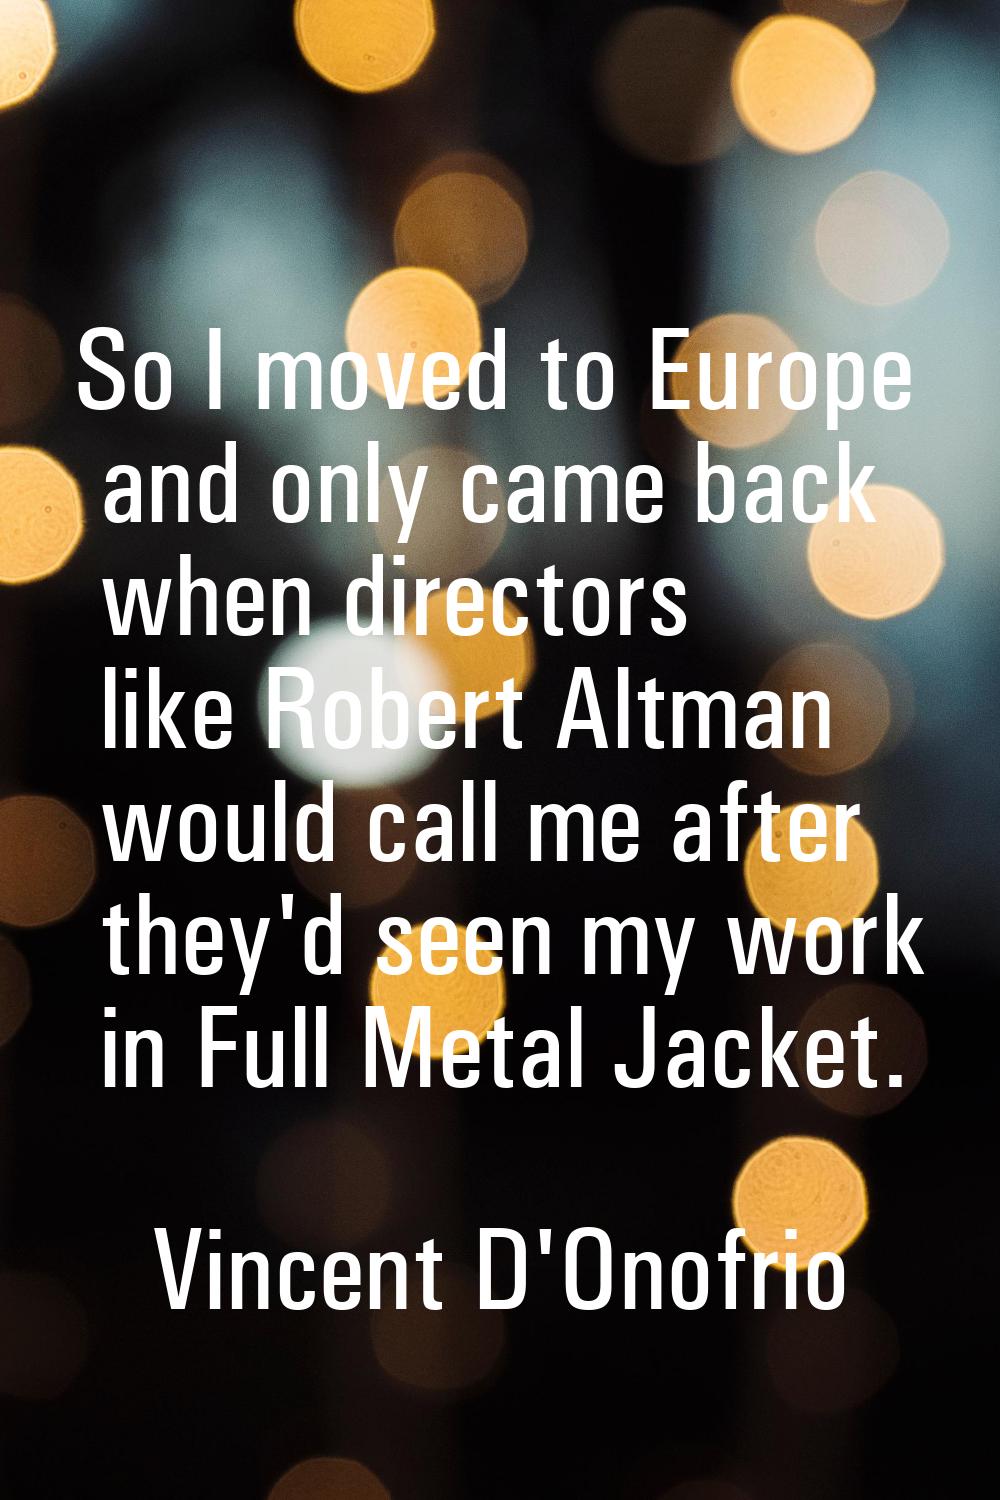 So I moved to Europe and only came back when directors like Robert Altman would call me after they'